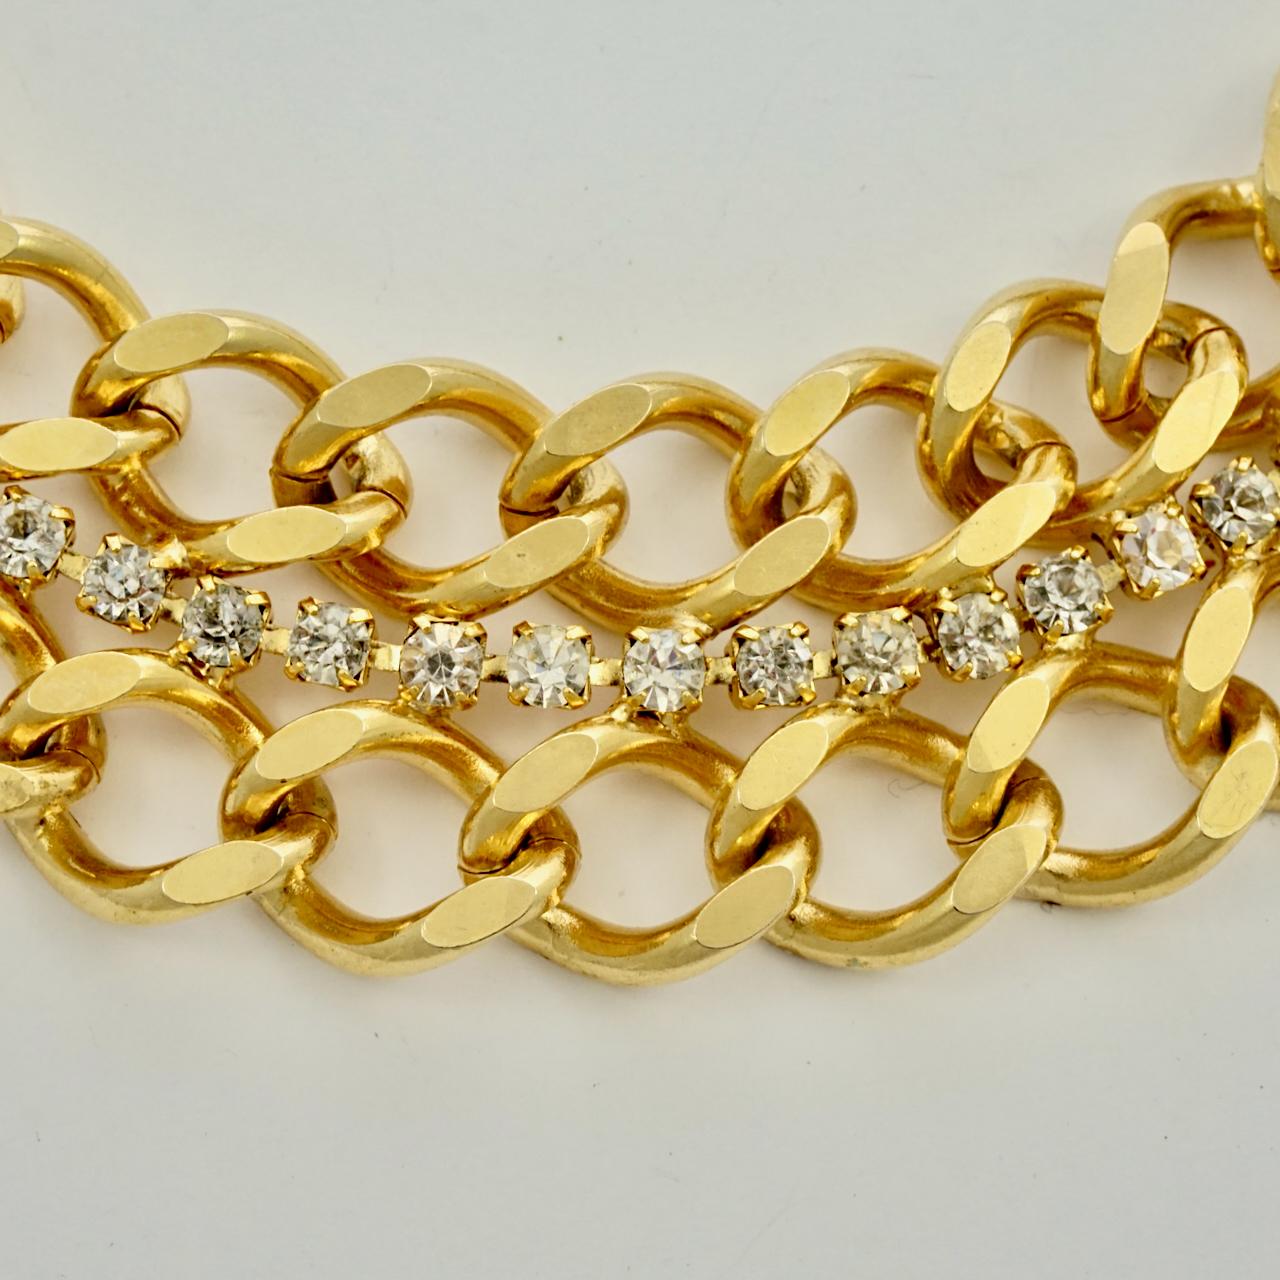 Gold Plated Curb Link Chain Collar Necklace with Rhinestones circa 1980s For Sale 1